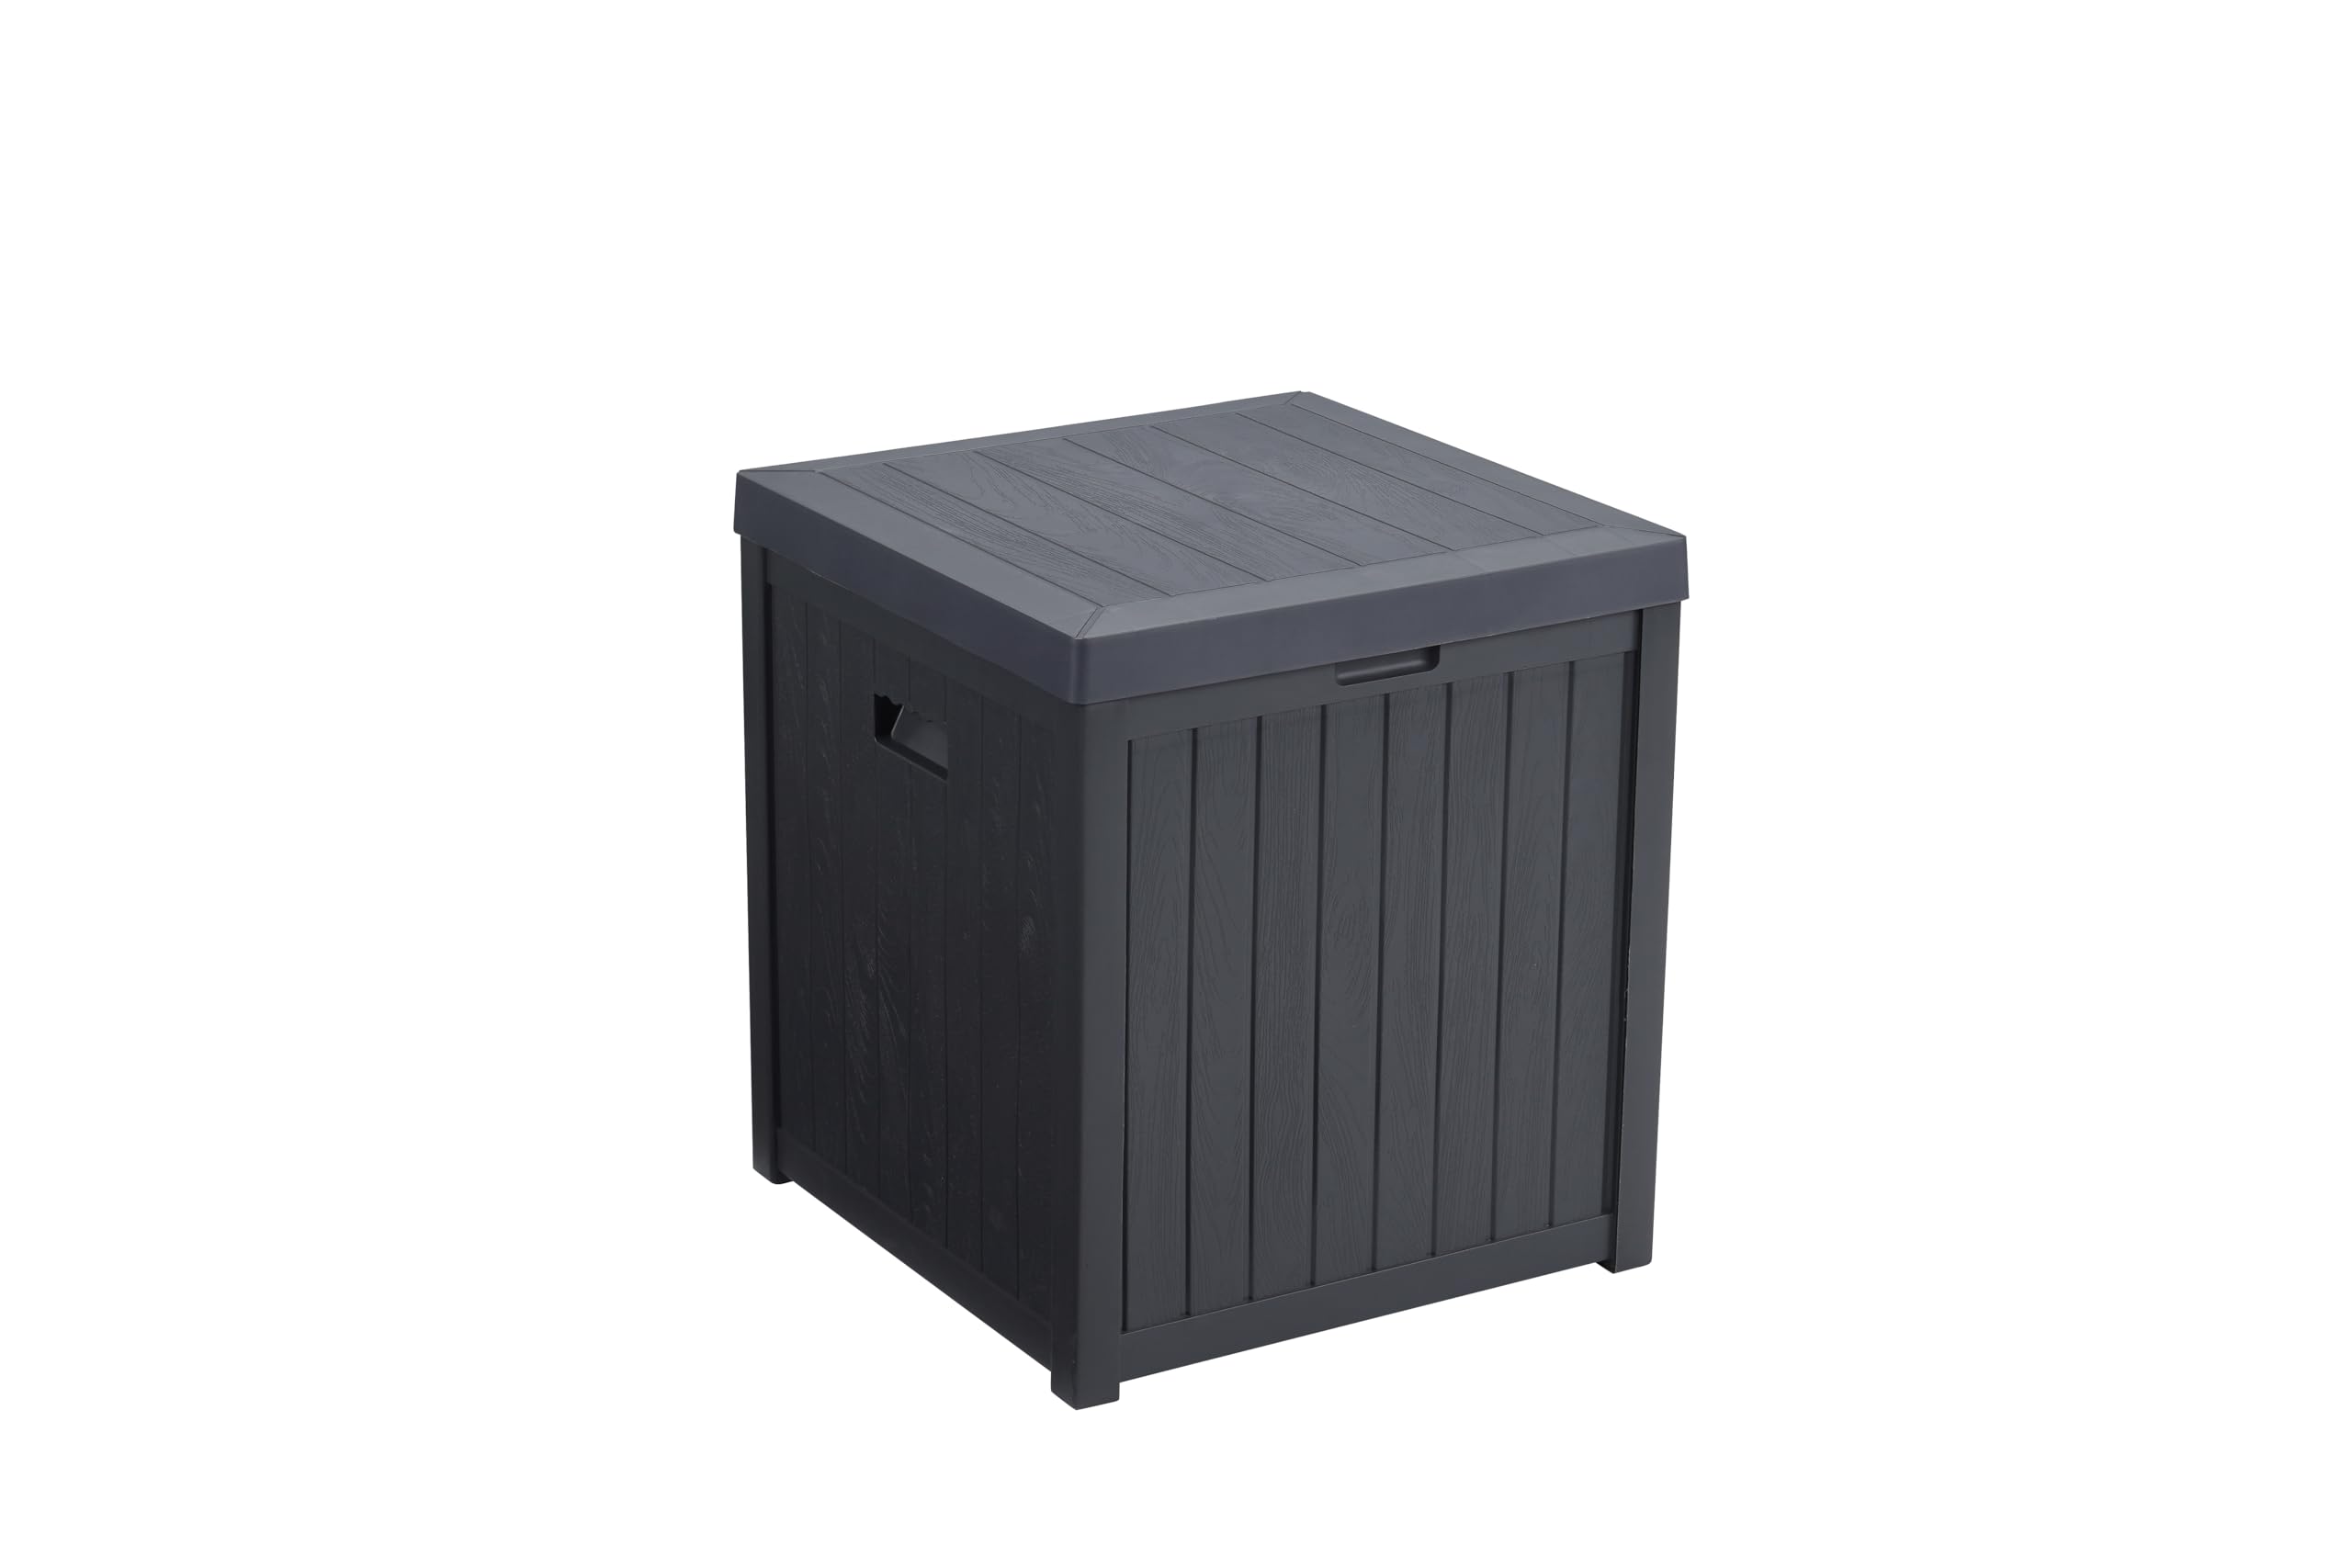 EHHLY Deck Box, 51 Gallon Front Porch Package Bin Delivery Box for Outside, Grey